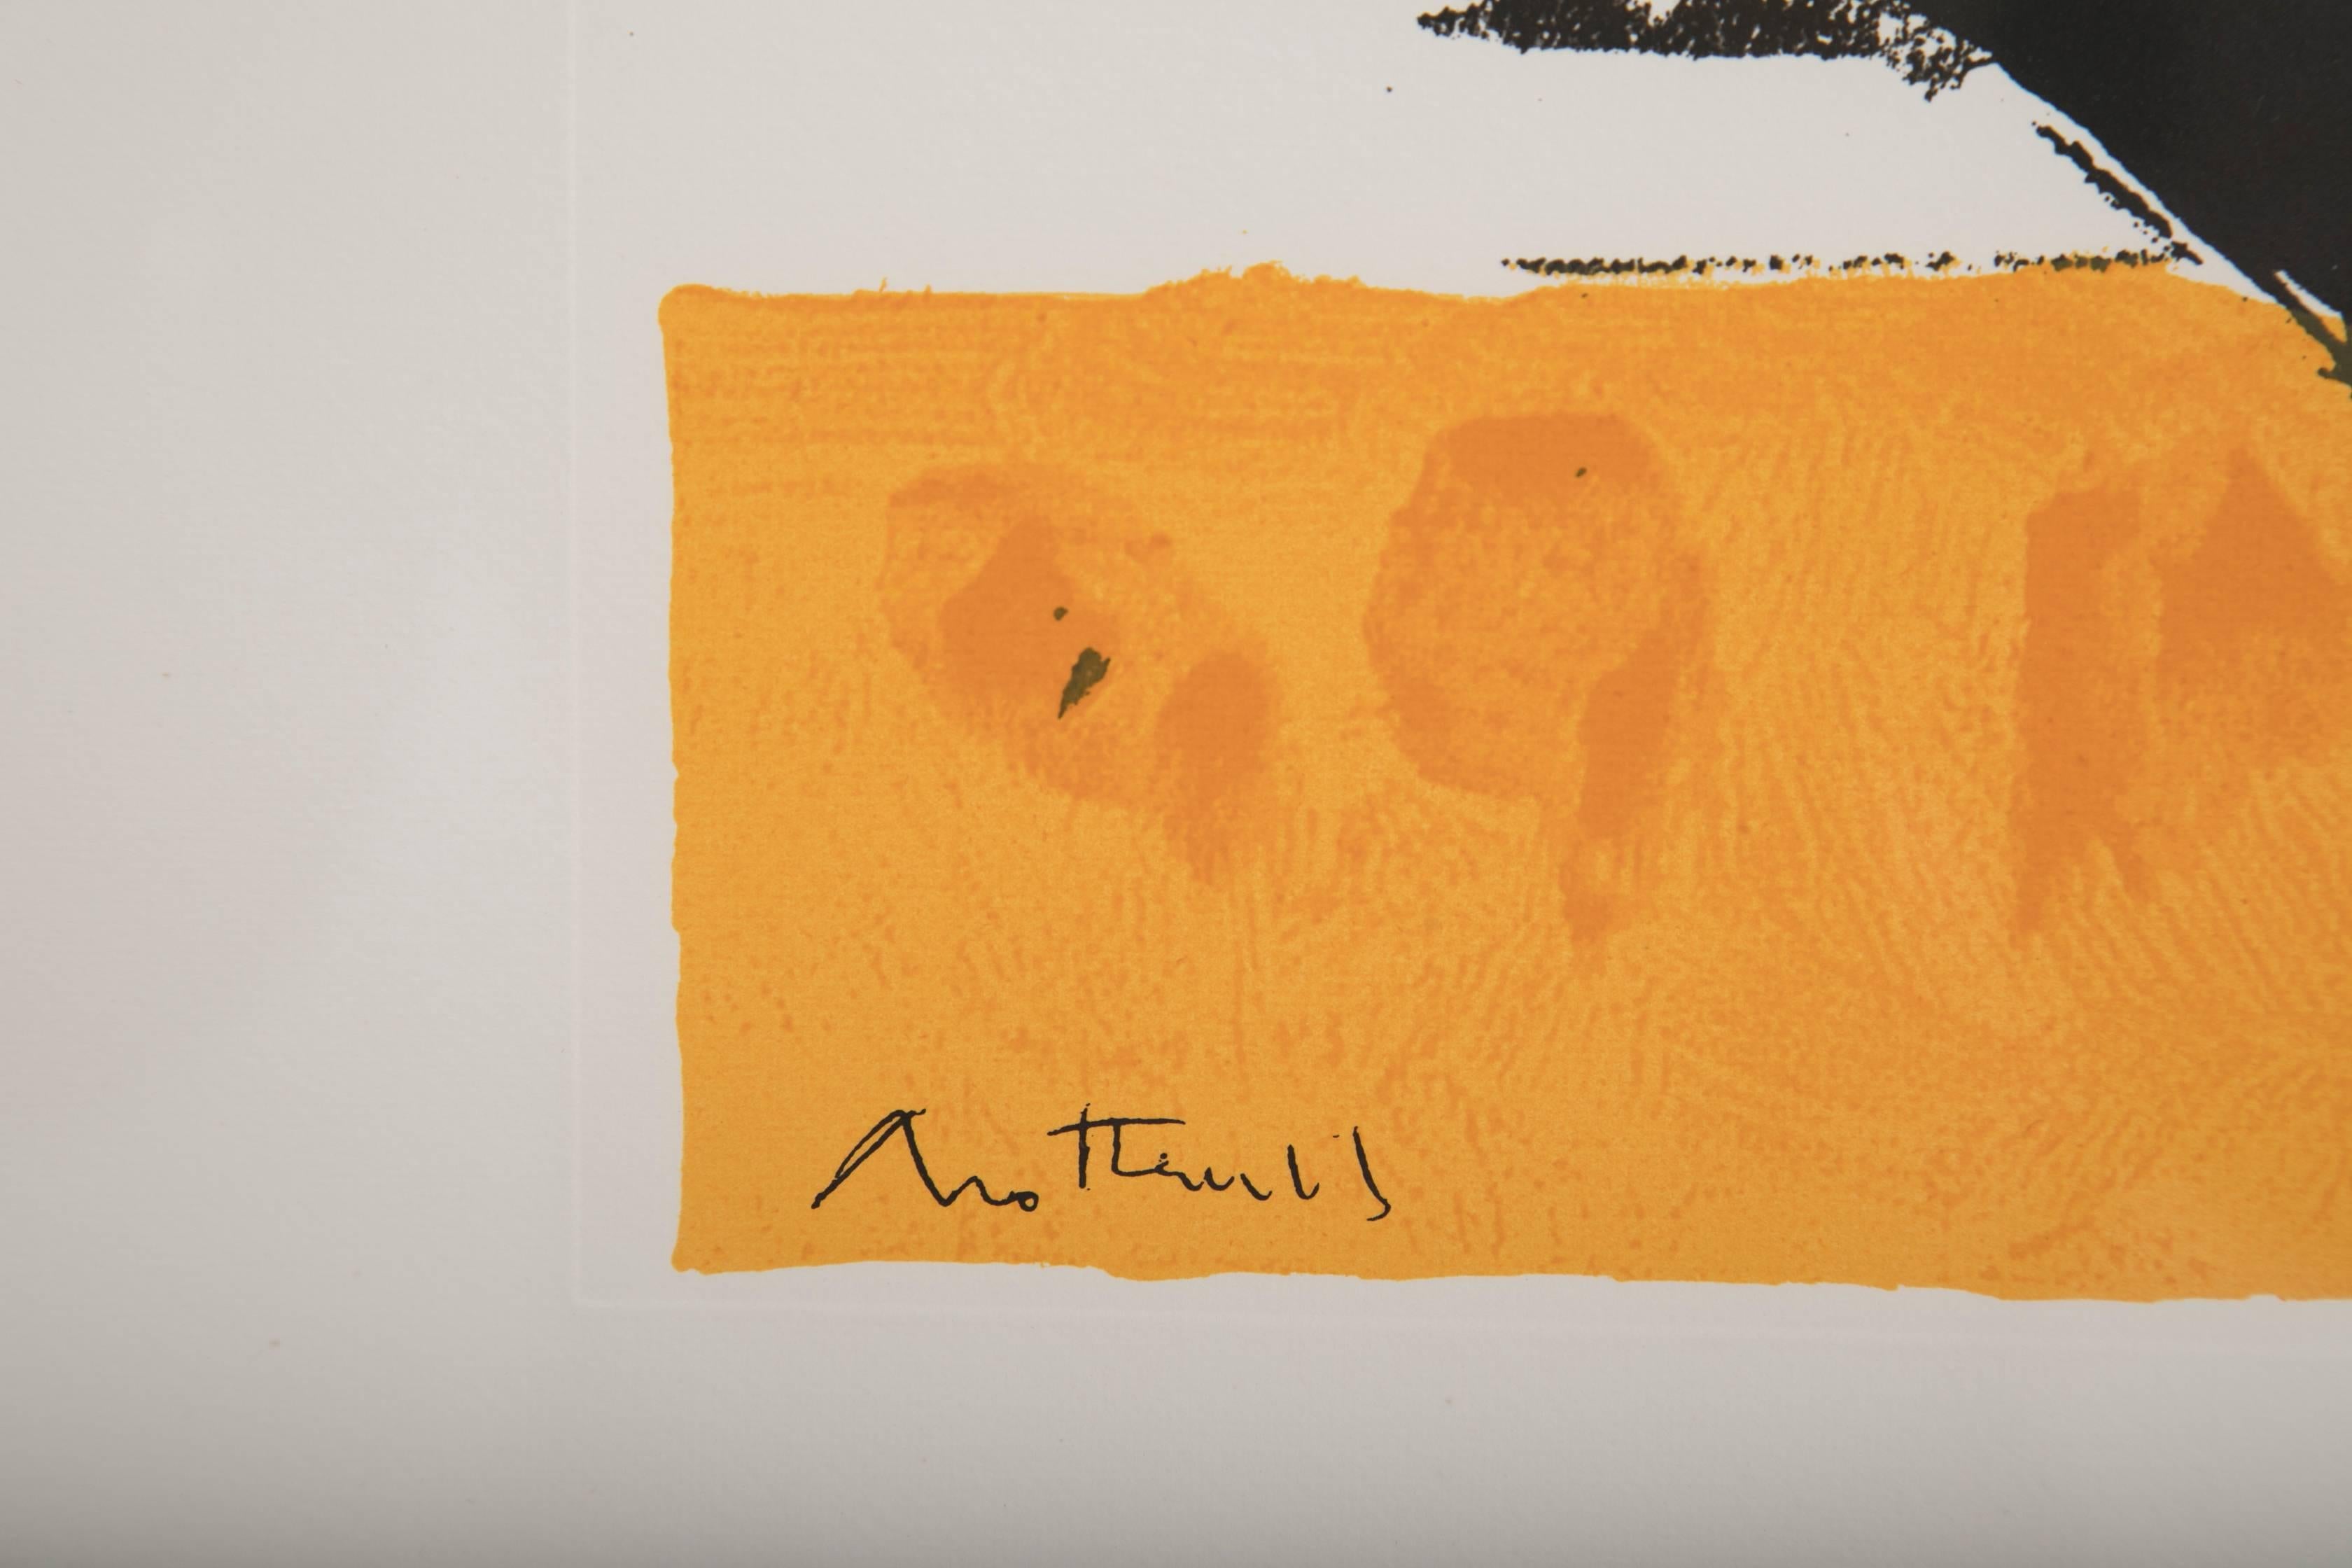 Mid-Century Modern The Basque Suite: Untitled, Signed and Numbered Silkscreen by Robert Motherwell